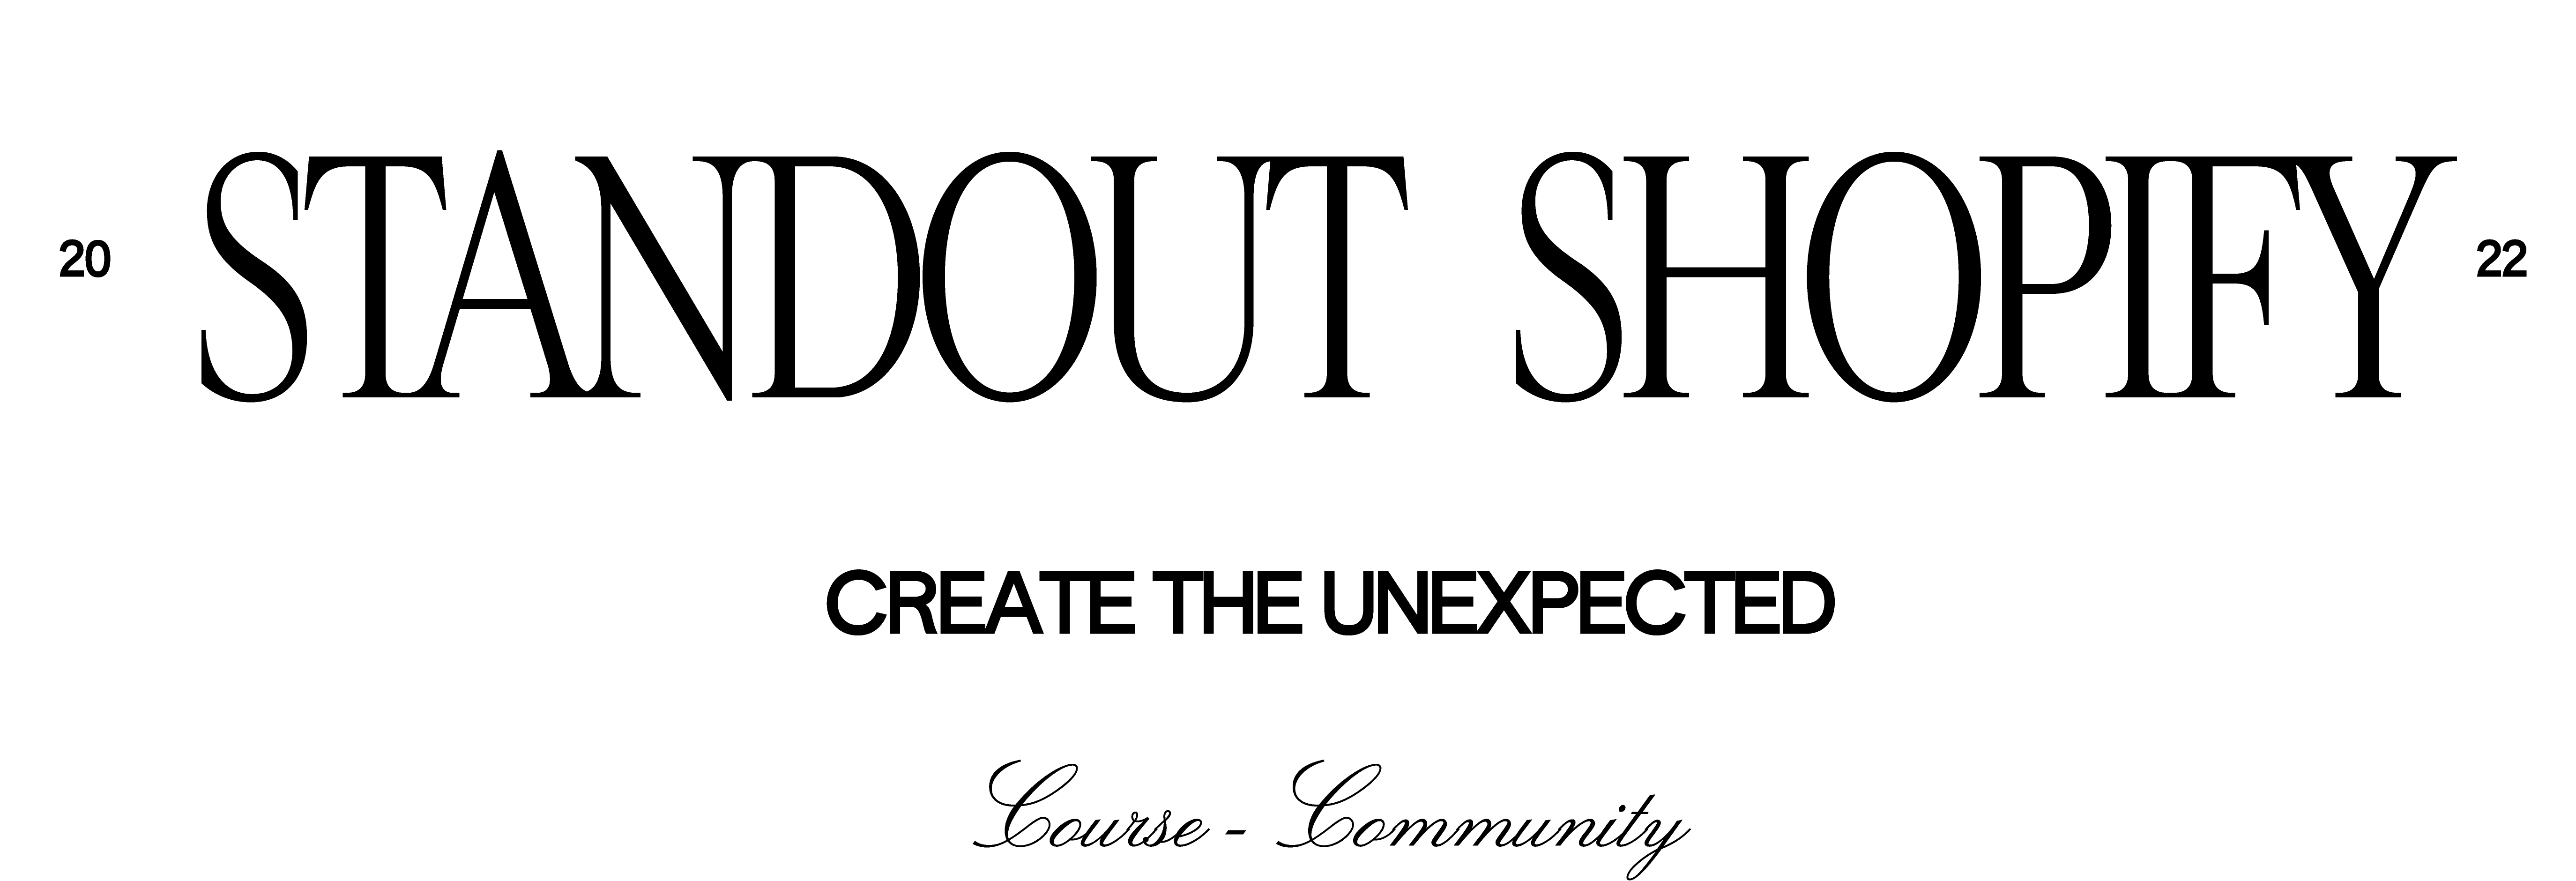 Standout Shopify By Rache - Free Download eCommerce Course